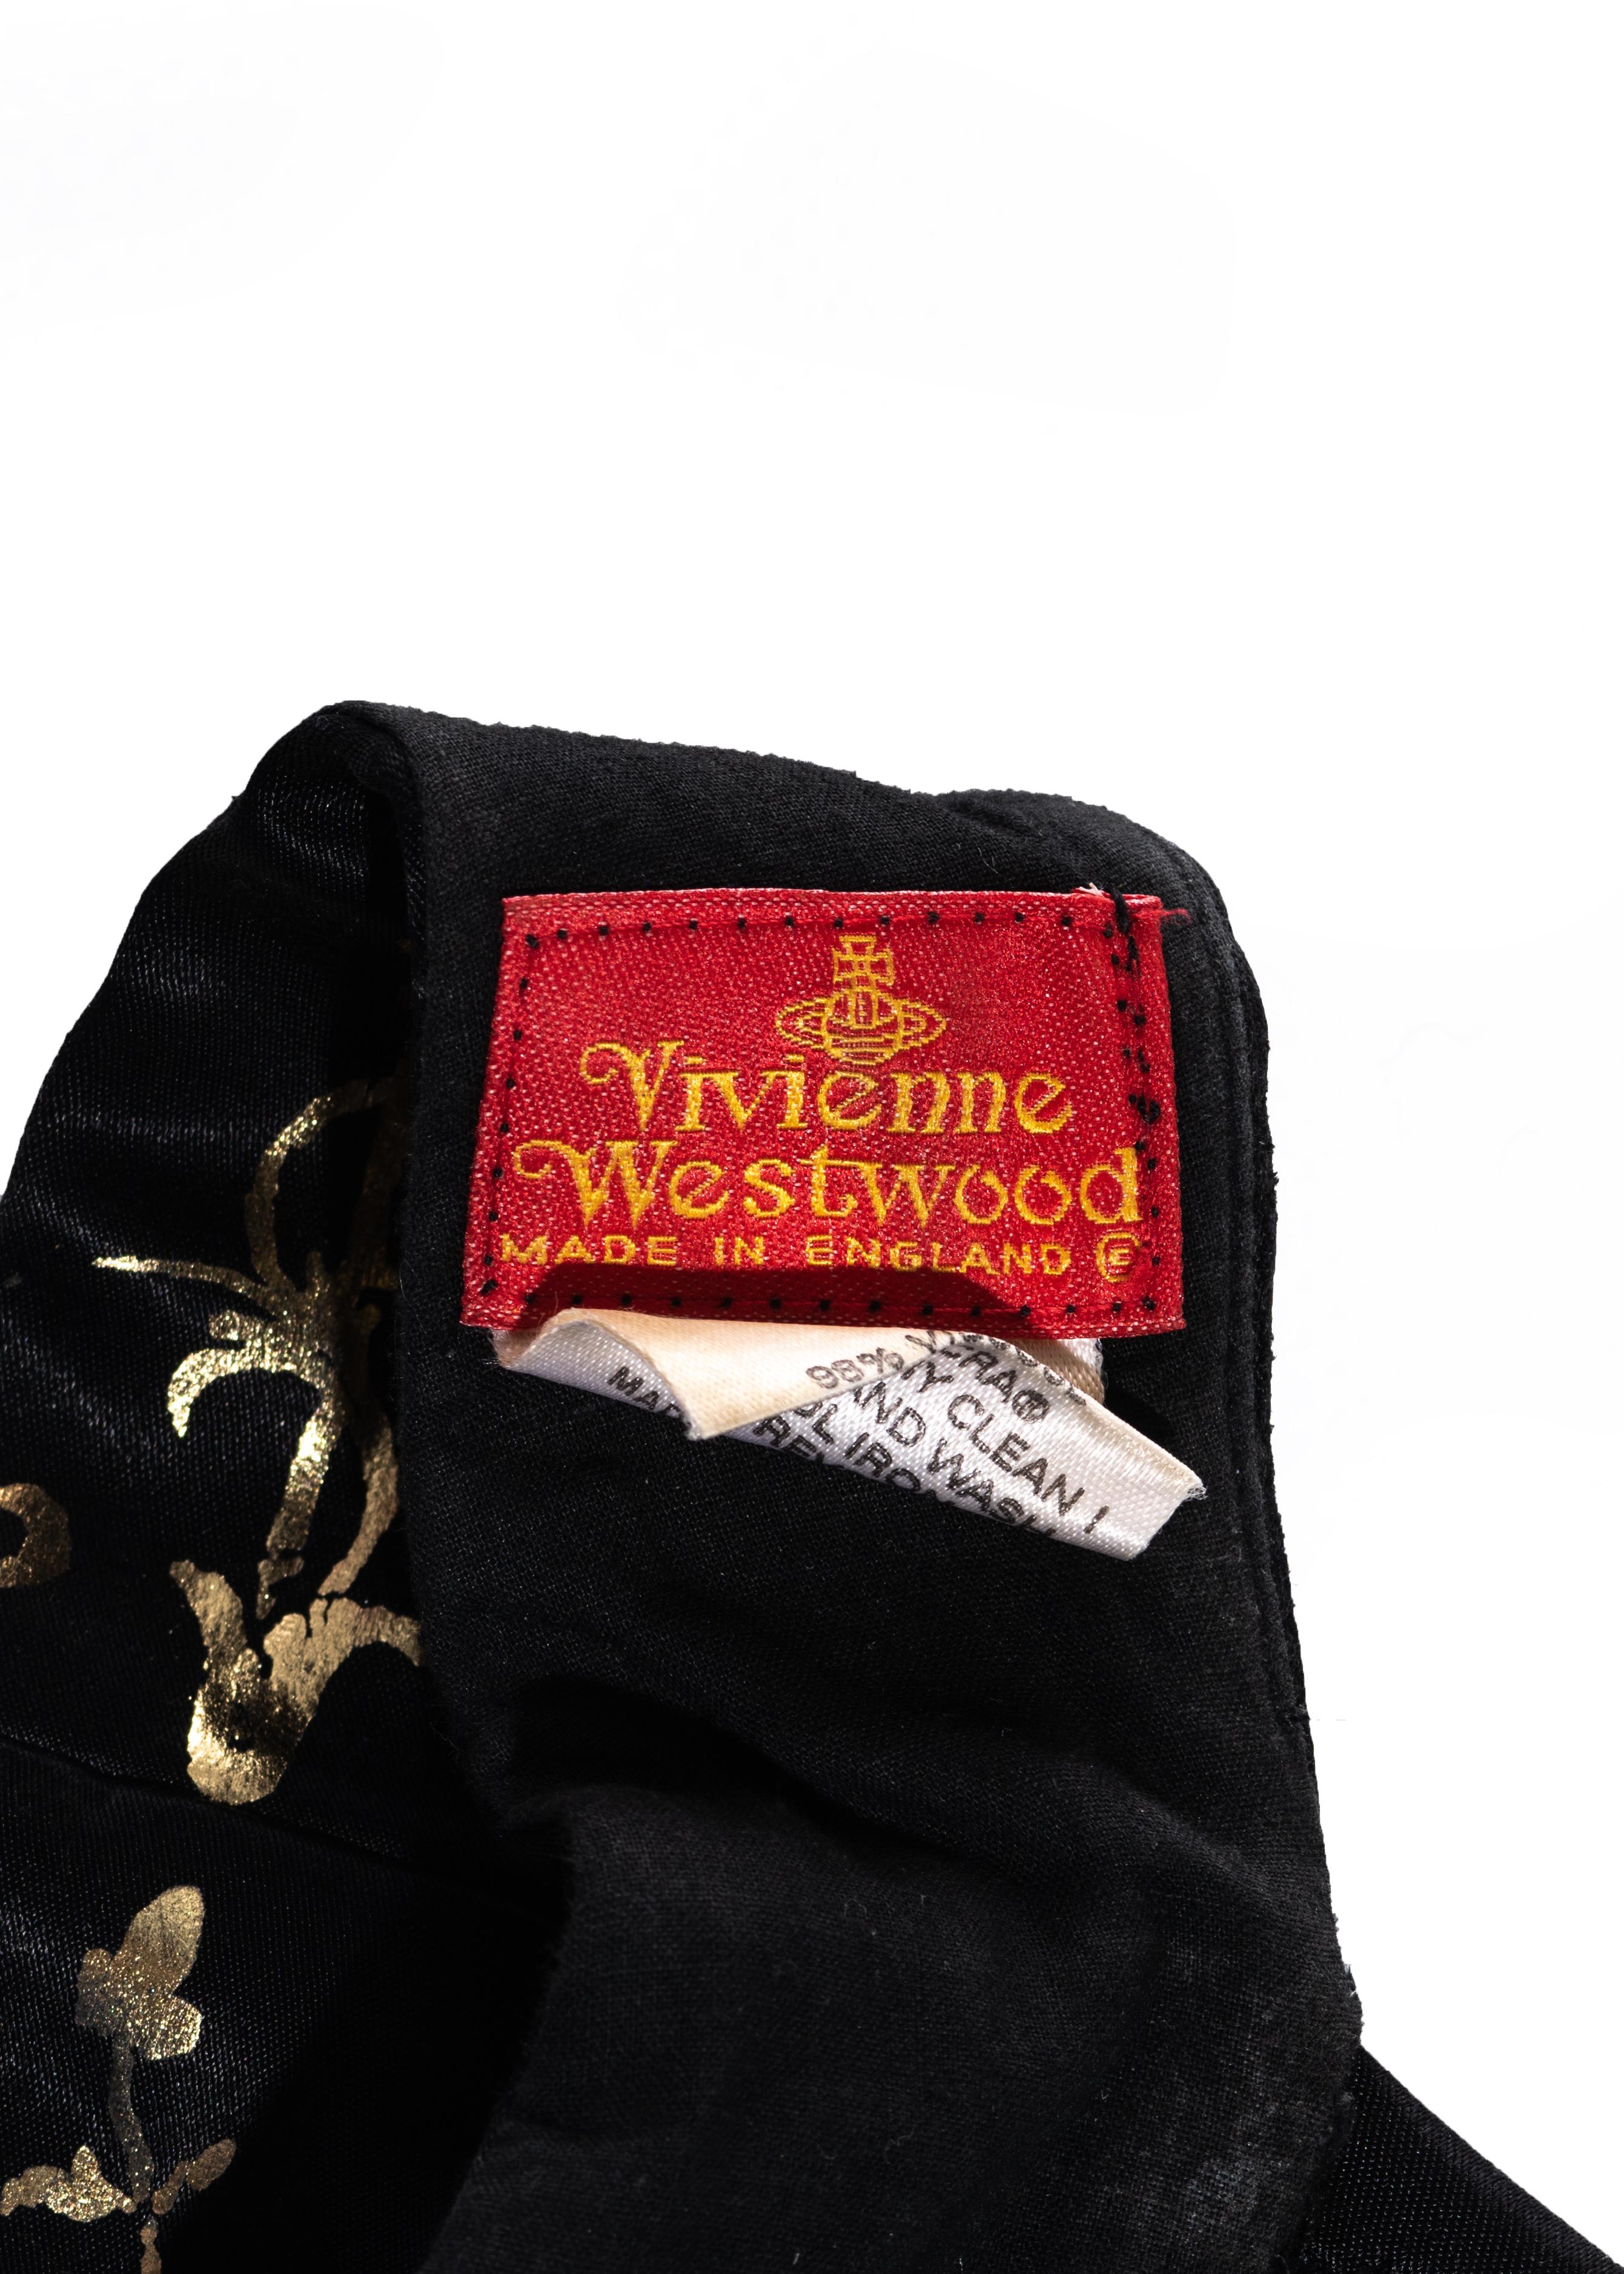 Vivienne Westwood black satin corset with metallic gold pattern, ss 1992 In Good Condition For Sale In London, GB